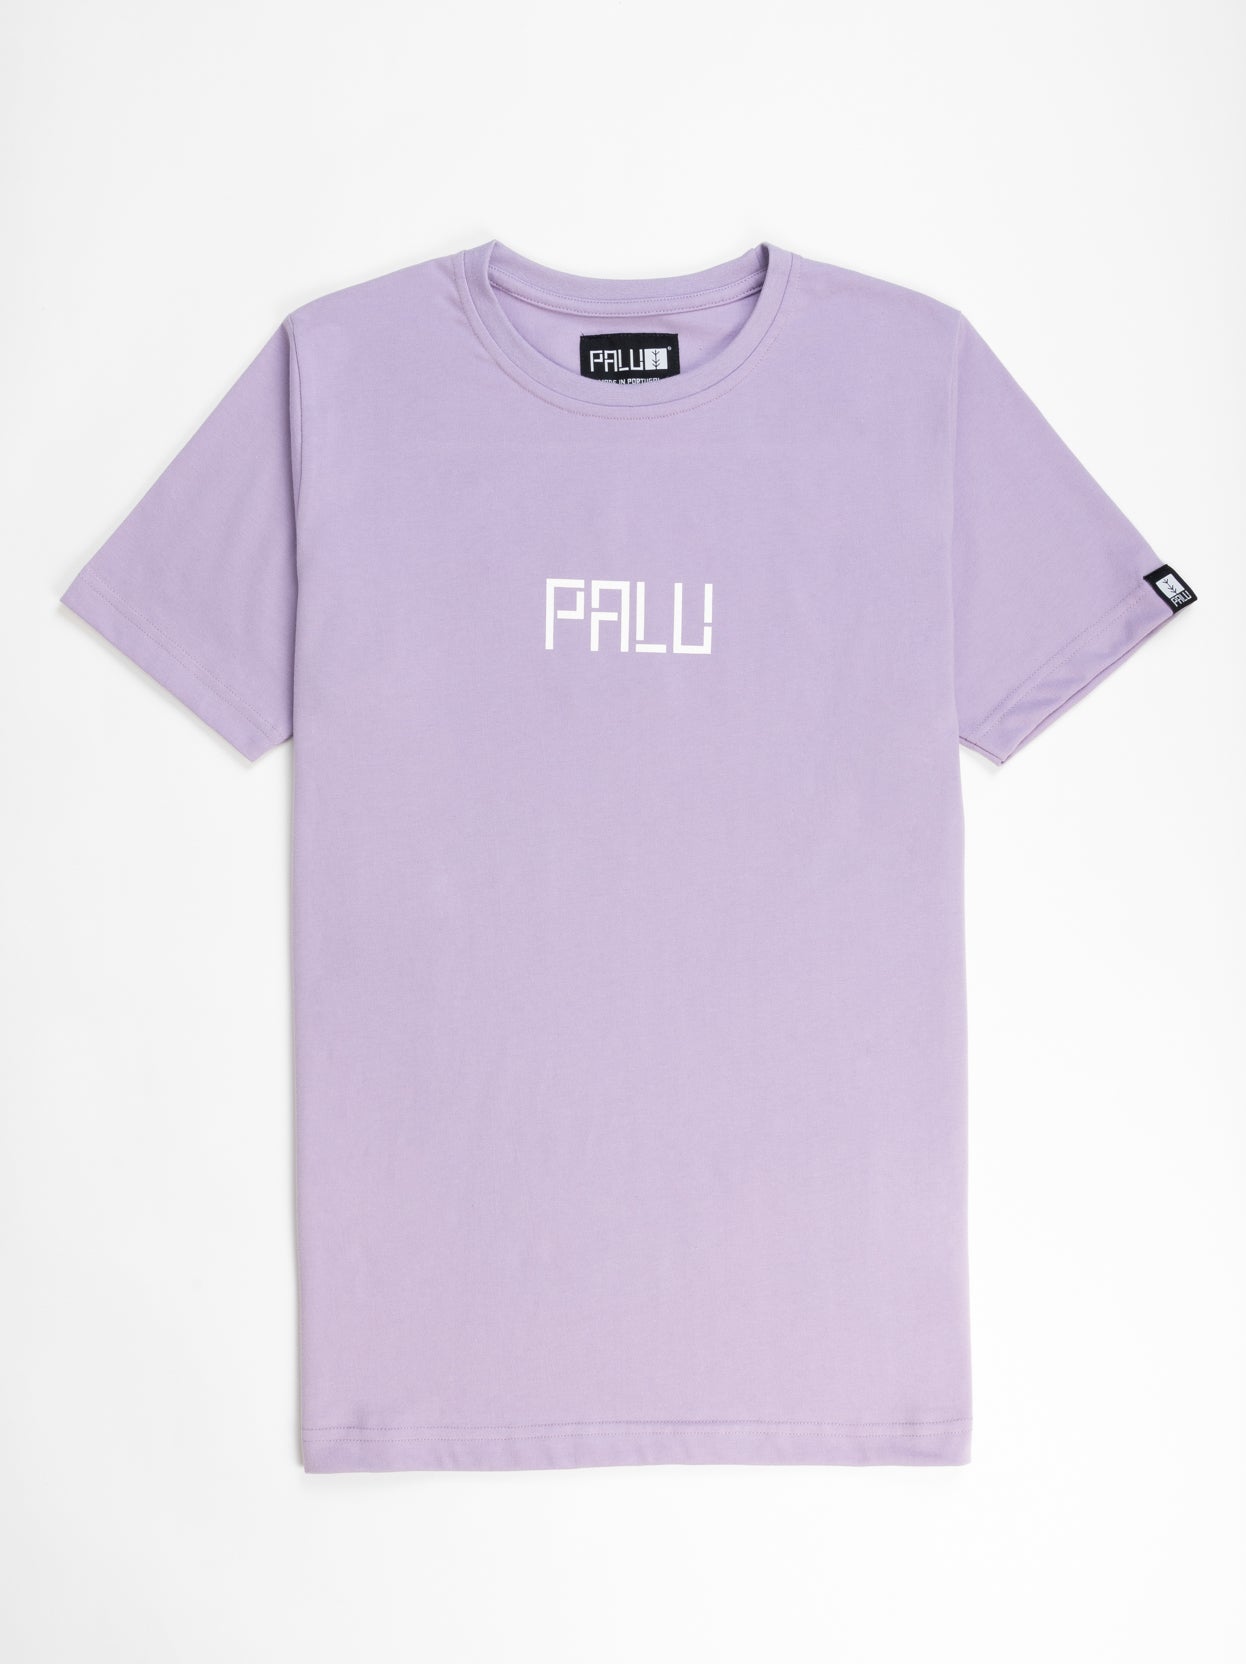 Lilac Travel Tee front